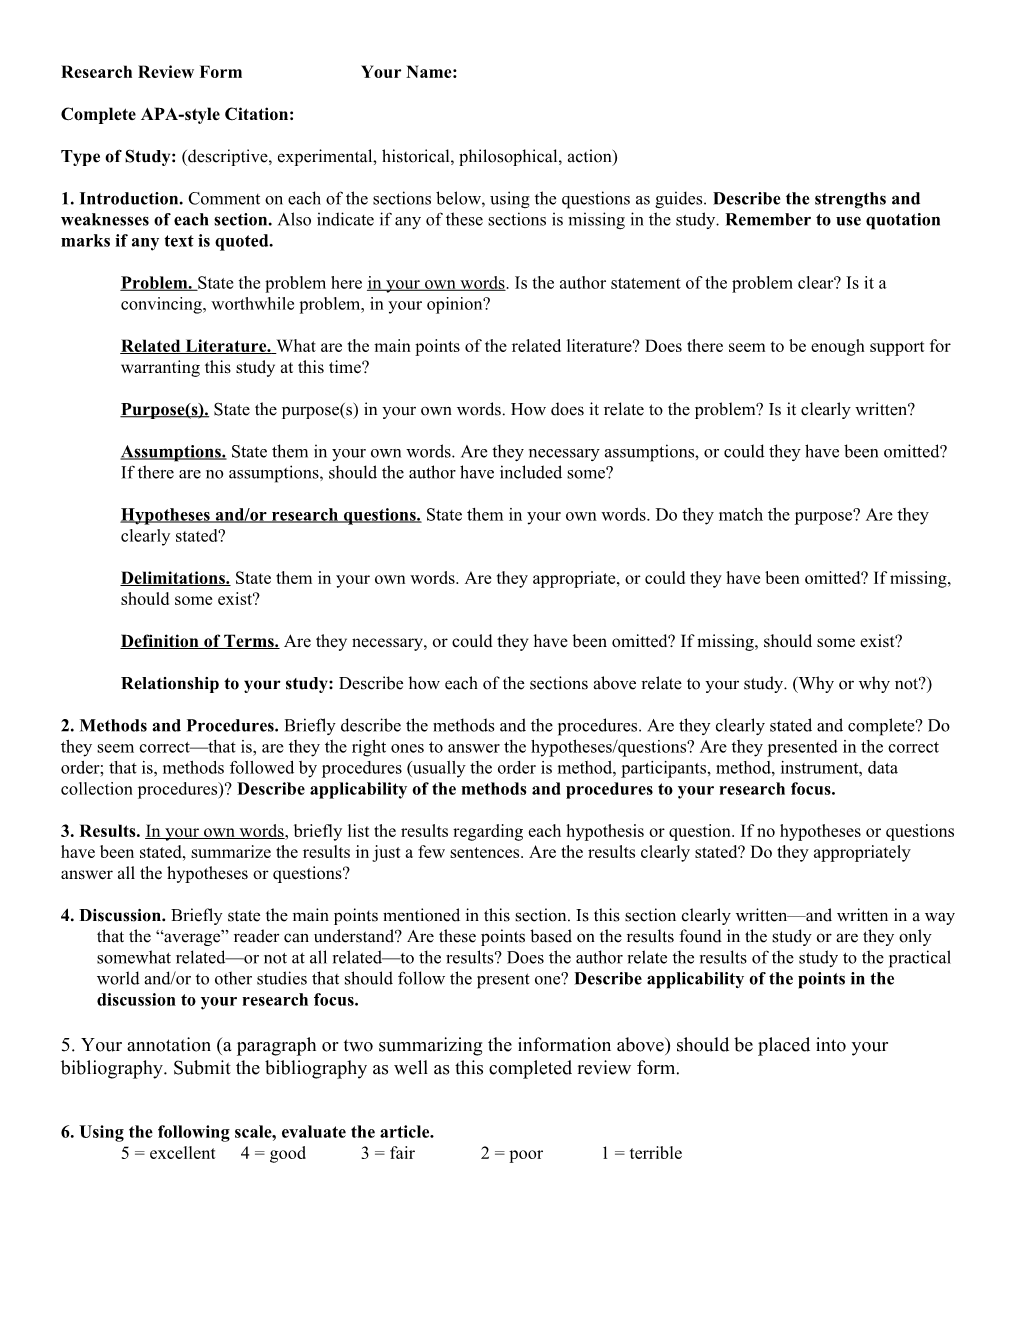 Research Review Form